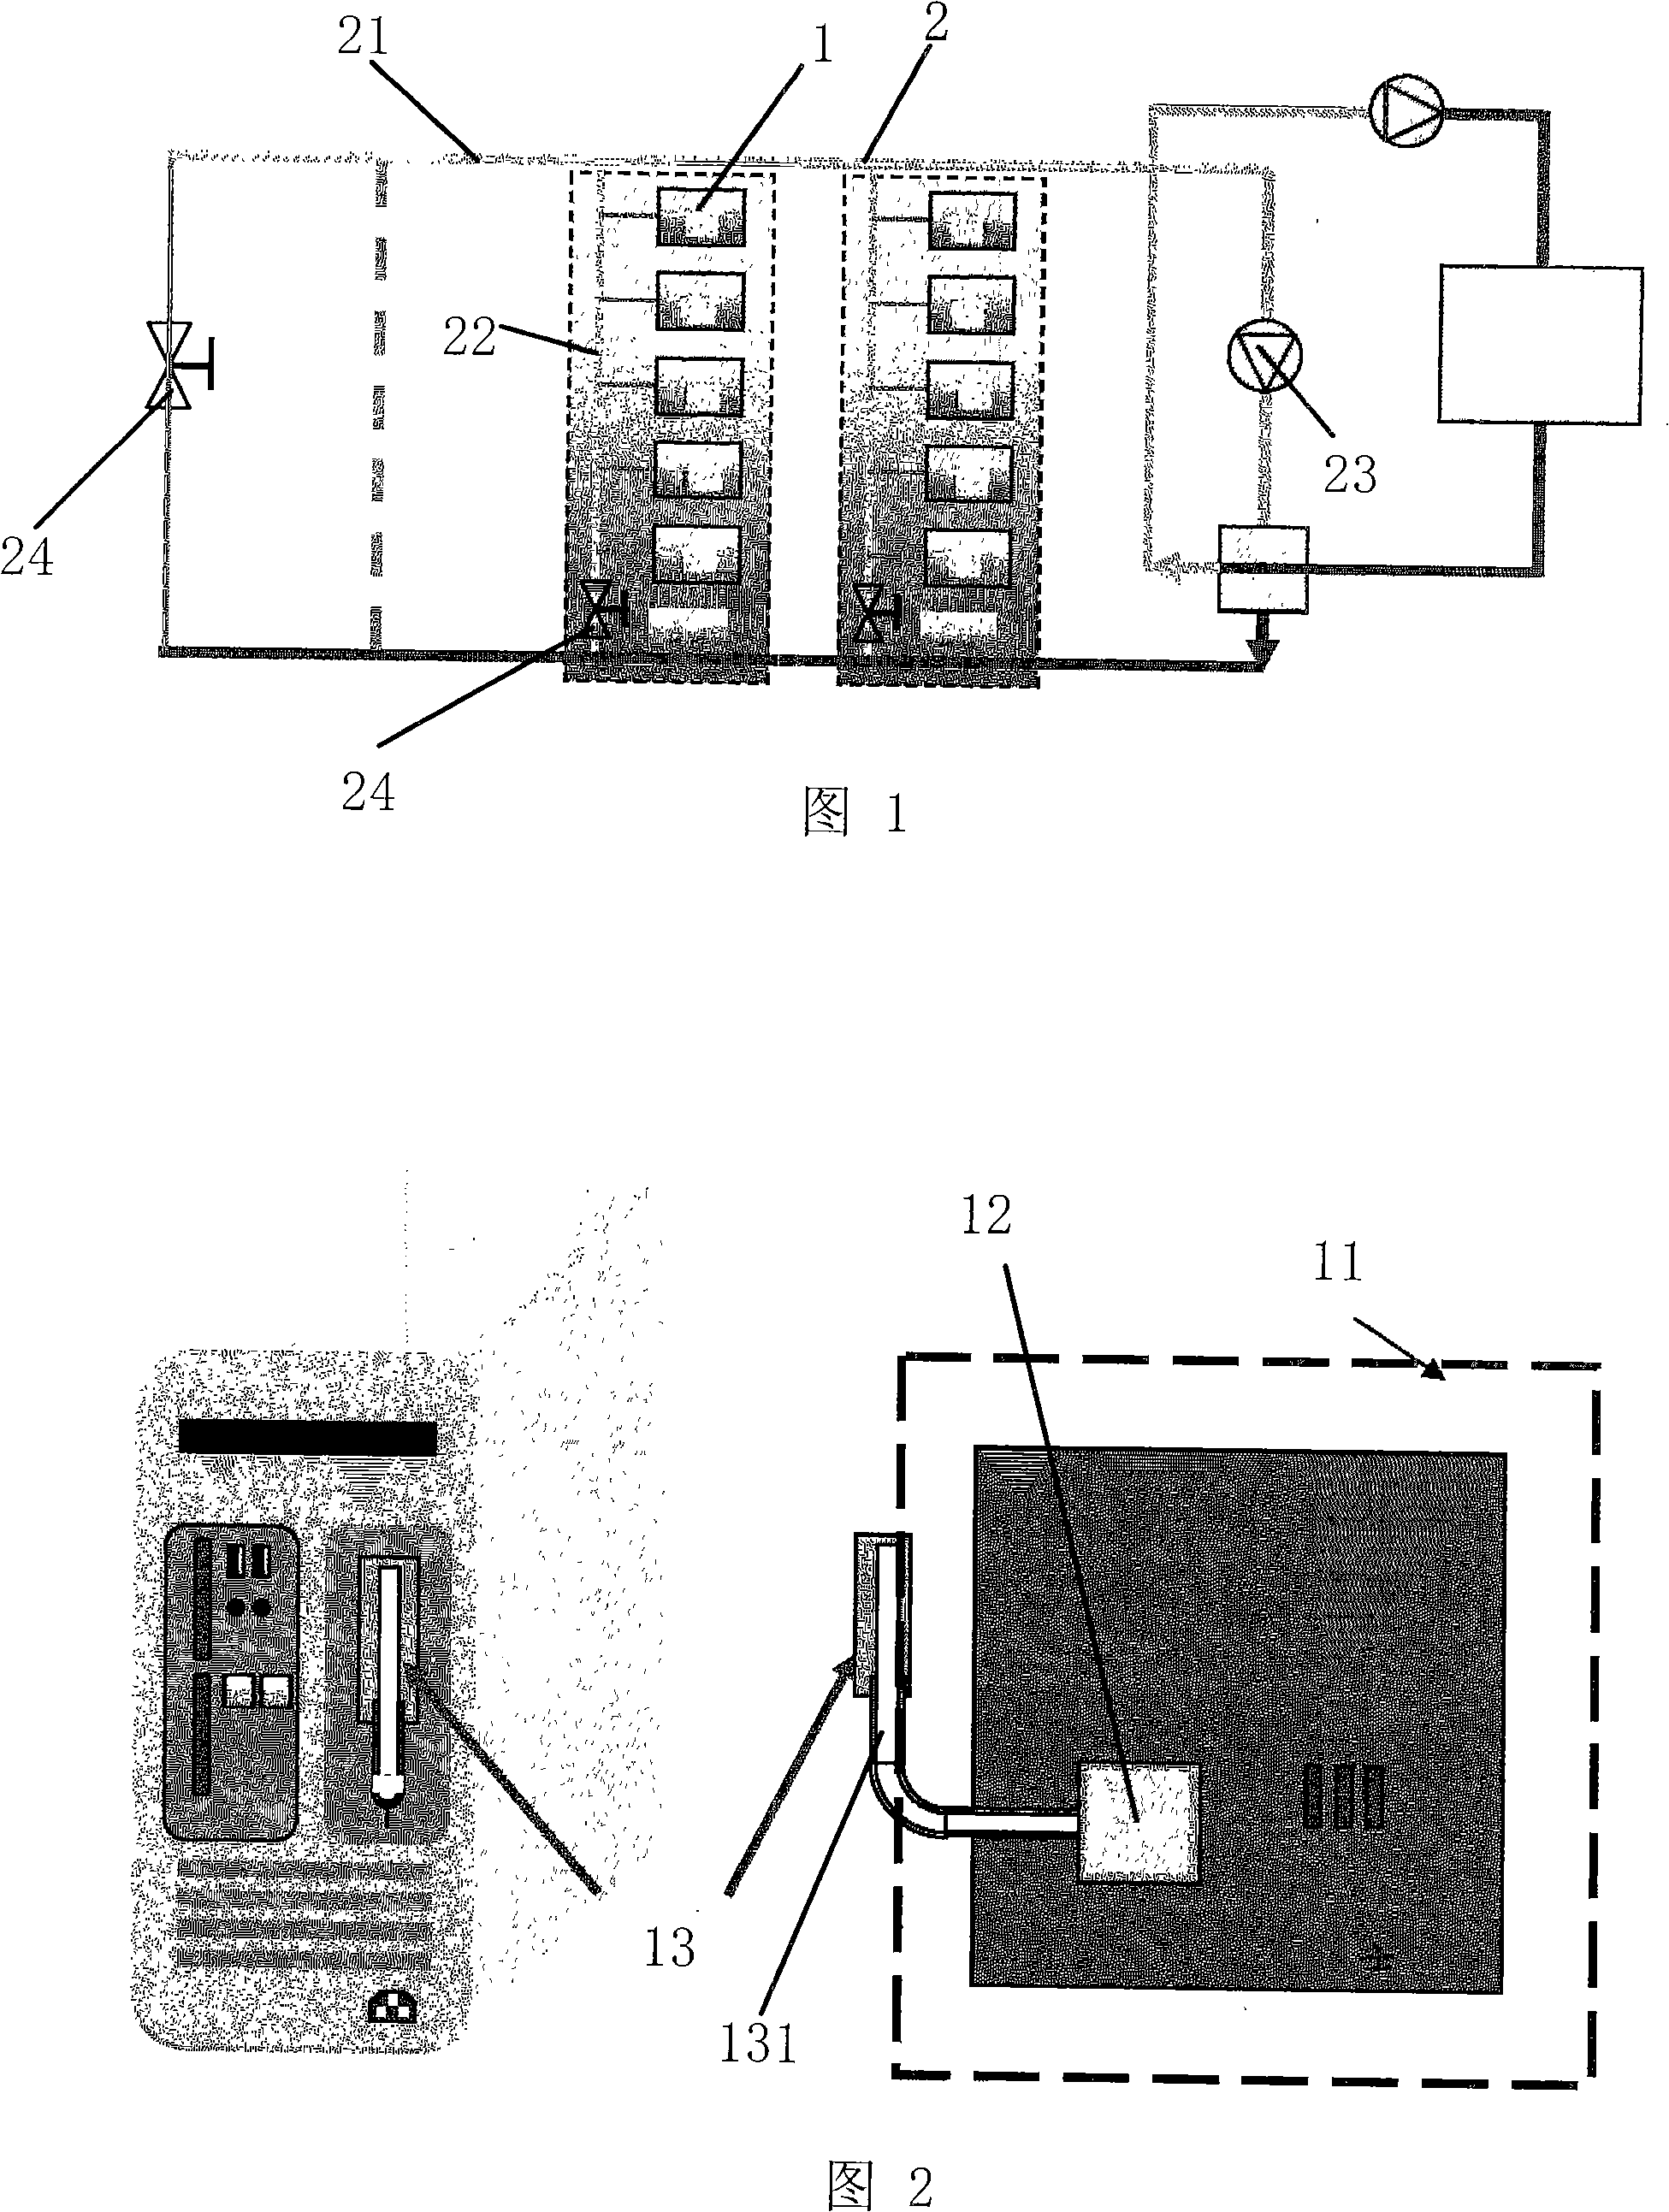 Radiation system for calculation processing arrangements and equipment adopting the heat radiation system